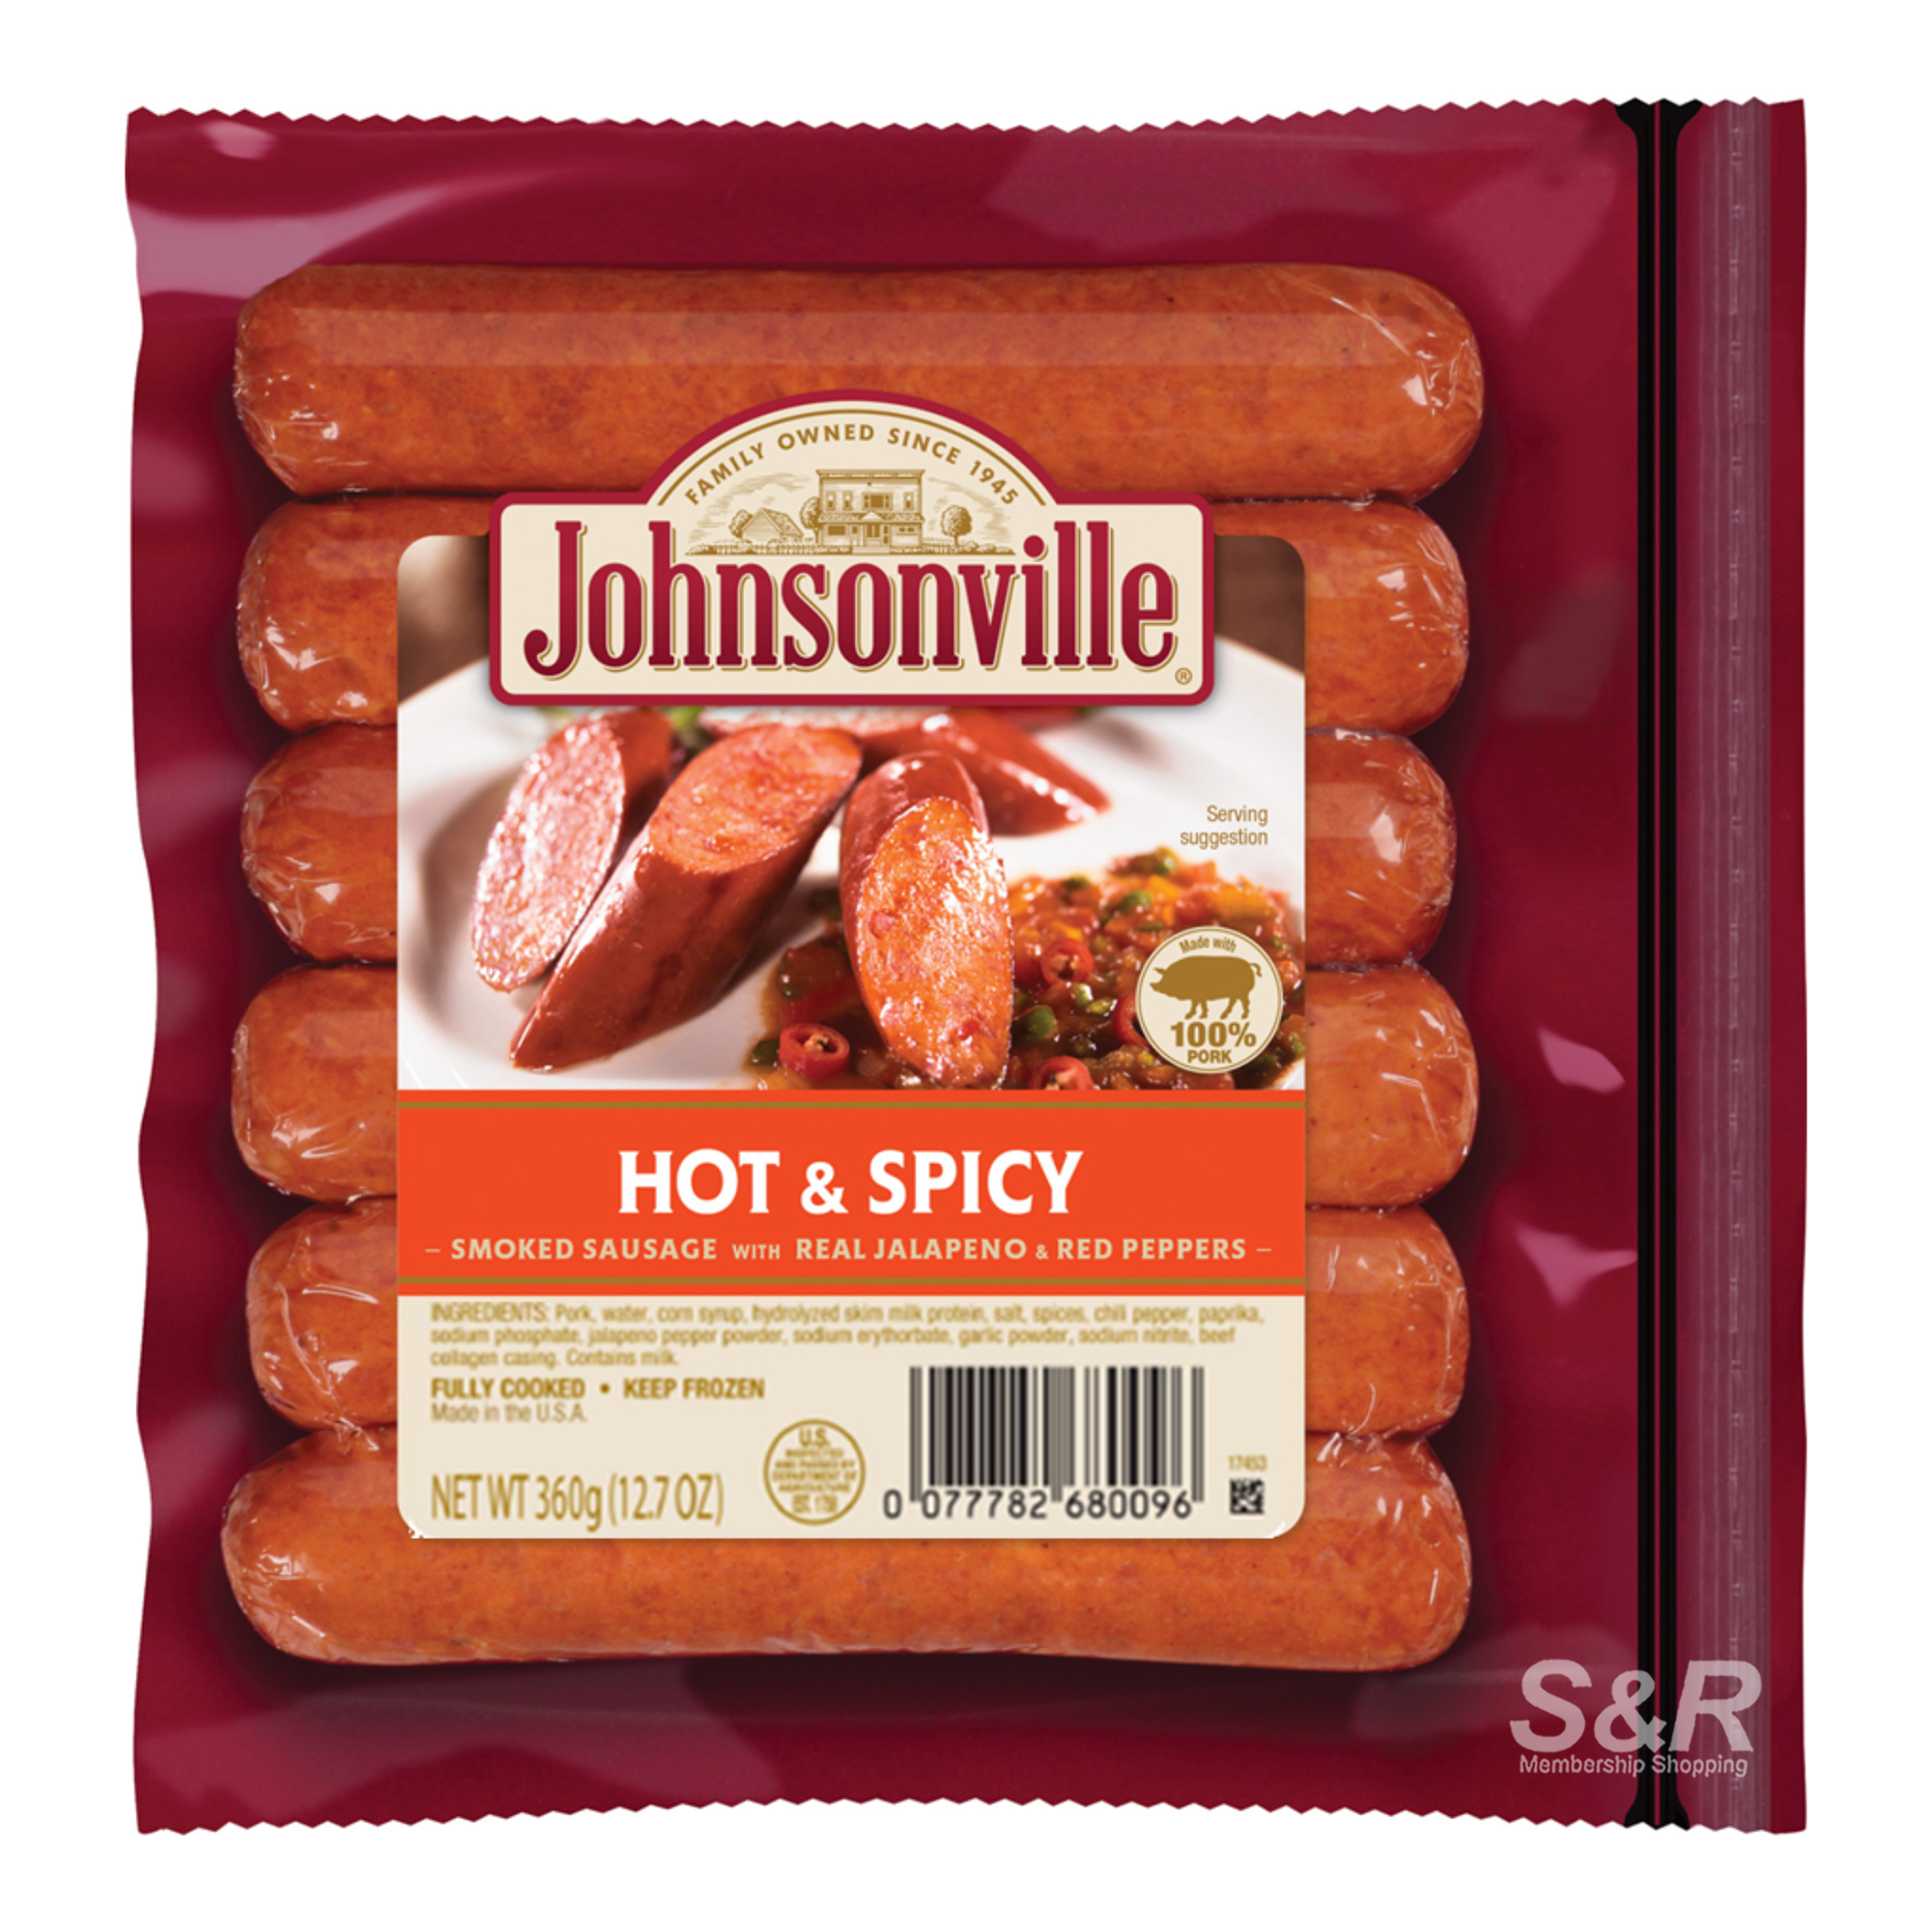 Johnsonville Smoked Sausage Hot and Spicy 360g